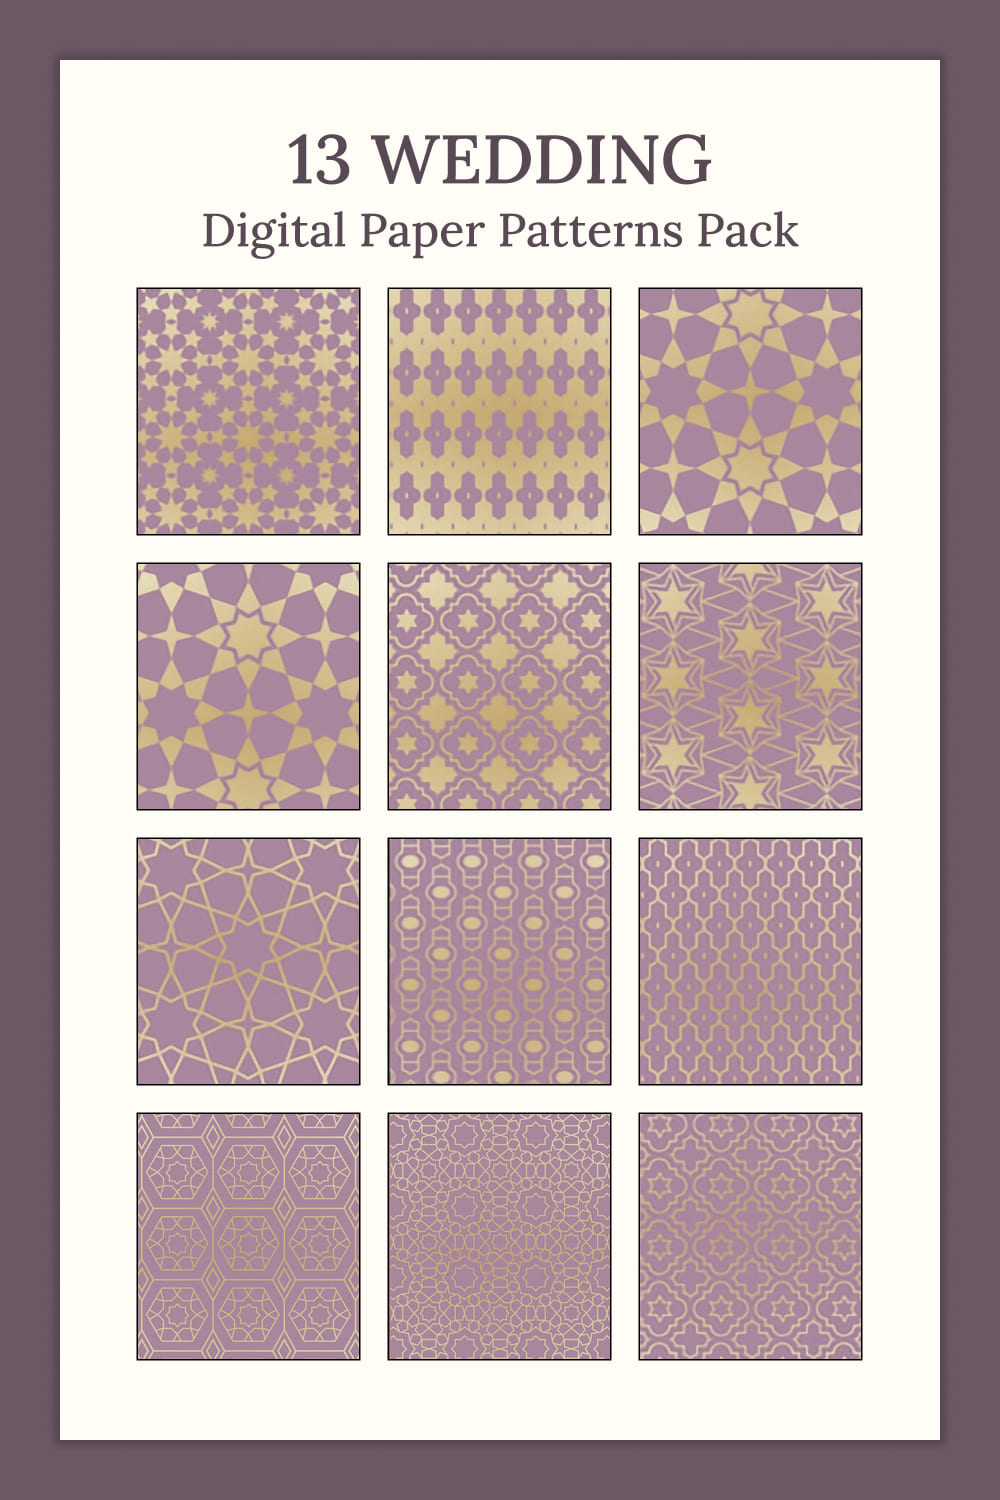 Various golden patterns are drawn on purple backgrounds.